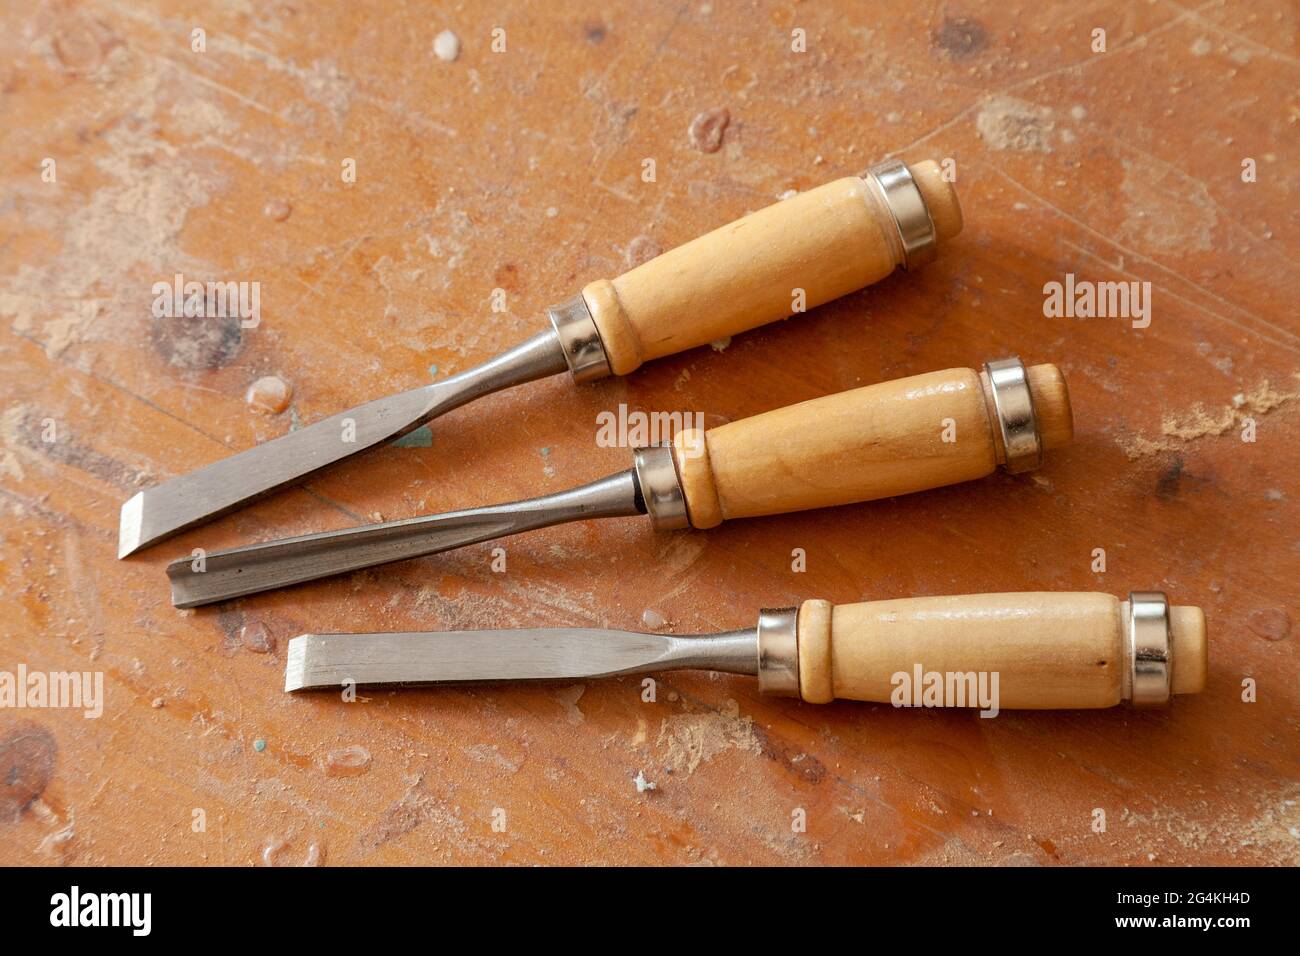 A set of three wood chisels on a dusty bench Stock Photo